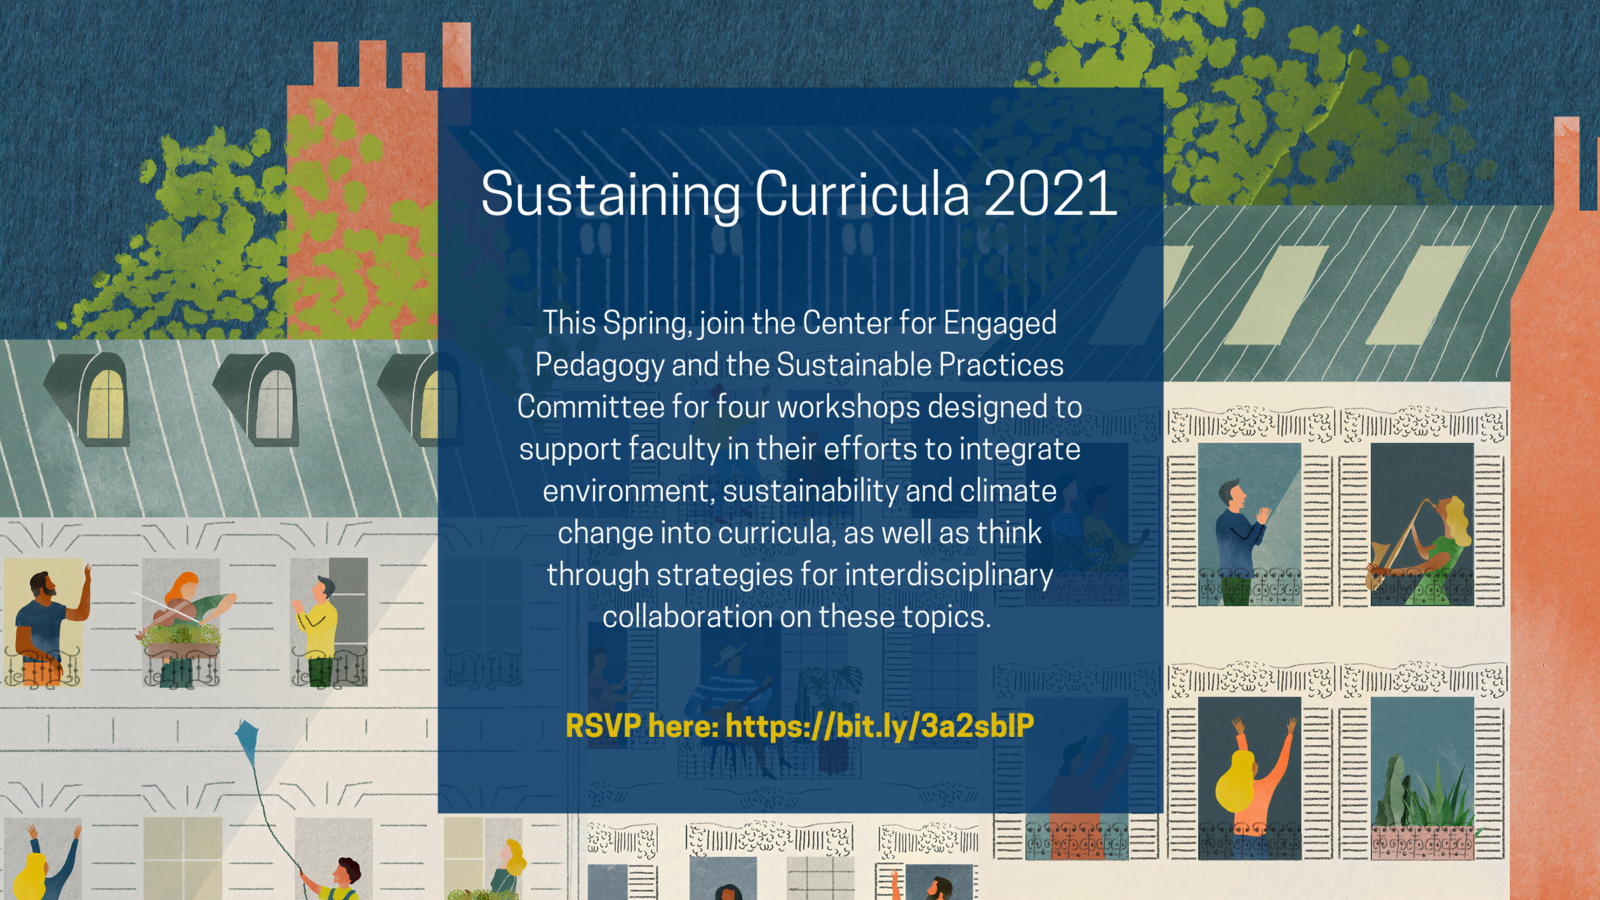 Flyer for Sustaining Curricula, with the text: "This Spring, join the Center for Engaged Pedagogy and the Sustainable Practices Committee for four workshops designed to support faculty in their efforts to integrate environment, sustainability and climate change into curricula, as well as think through strategies for interdisciplinary collaboration on these topics."